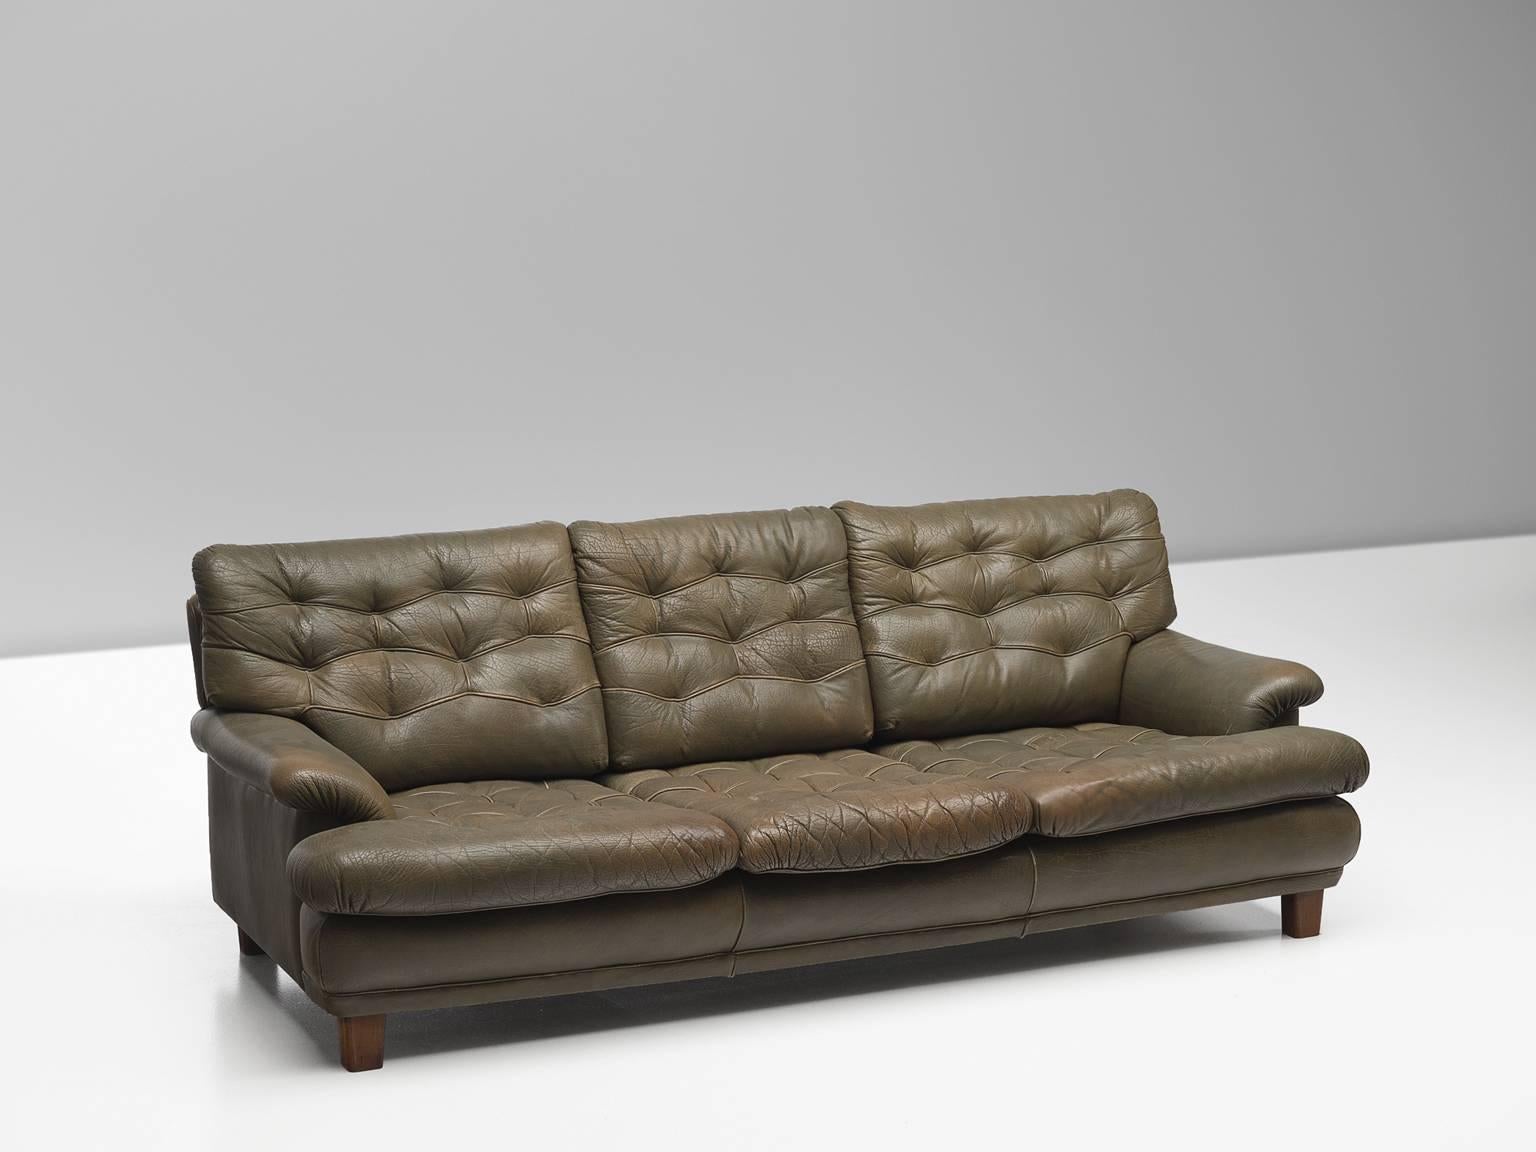 Sofa, in olive green leather and wood, by Arne Norell, Sweden, circa 1964. 

Three-seat sofa by Arne Norell. This sofa is refined, modern and with a robust touch. A true Swedish and Norell design. The sofa is made of brown leather with four cubic